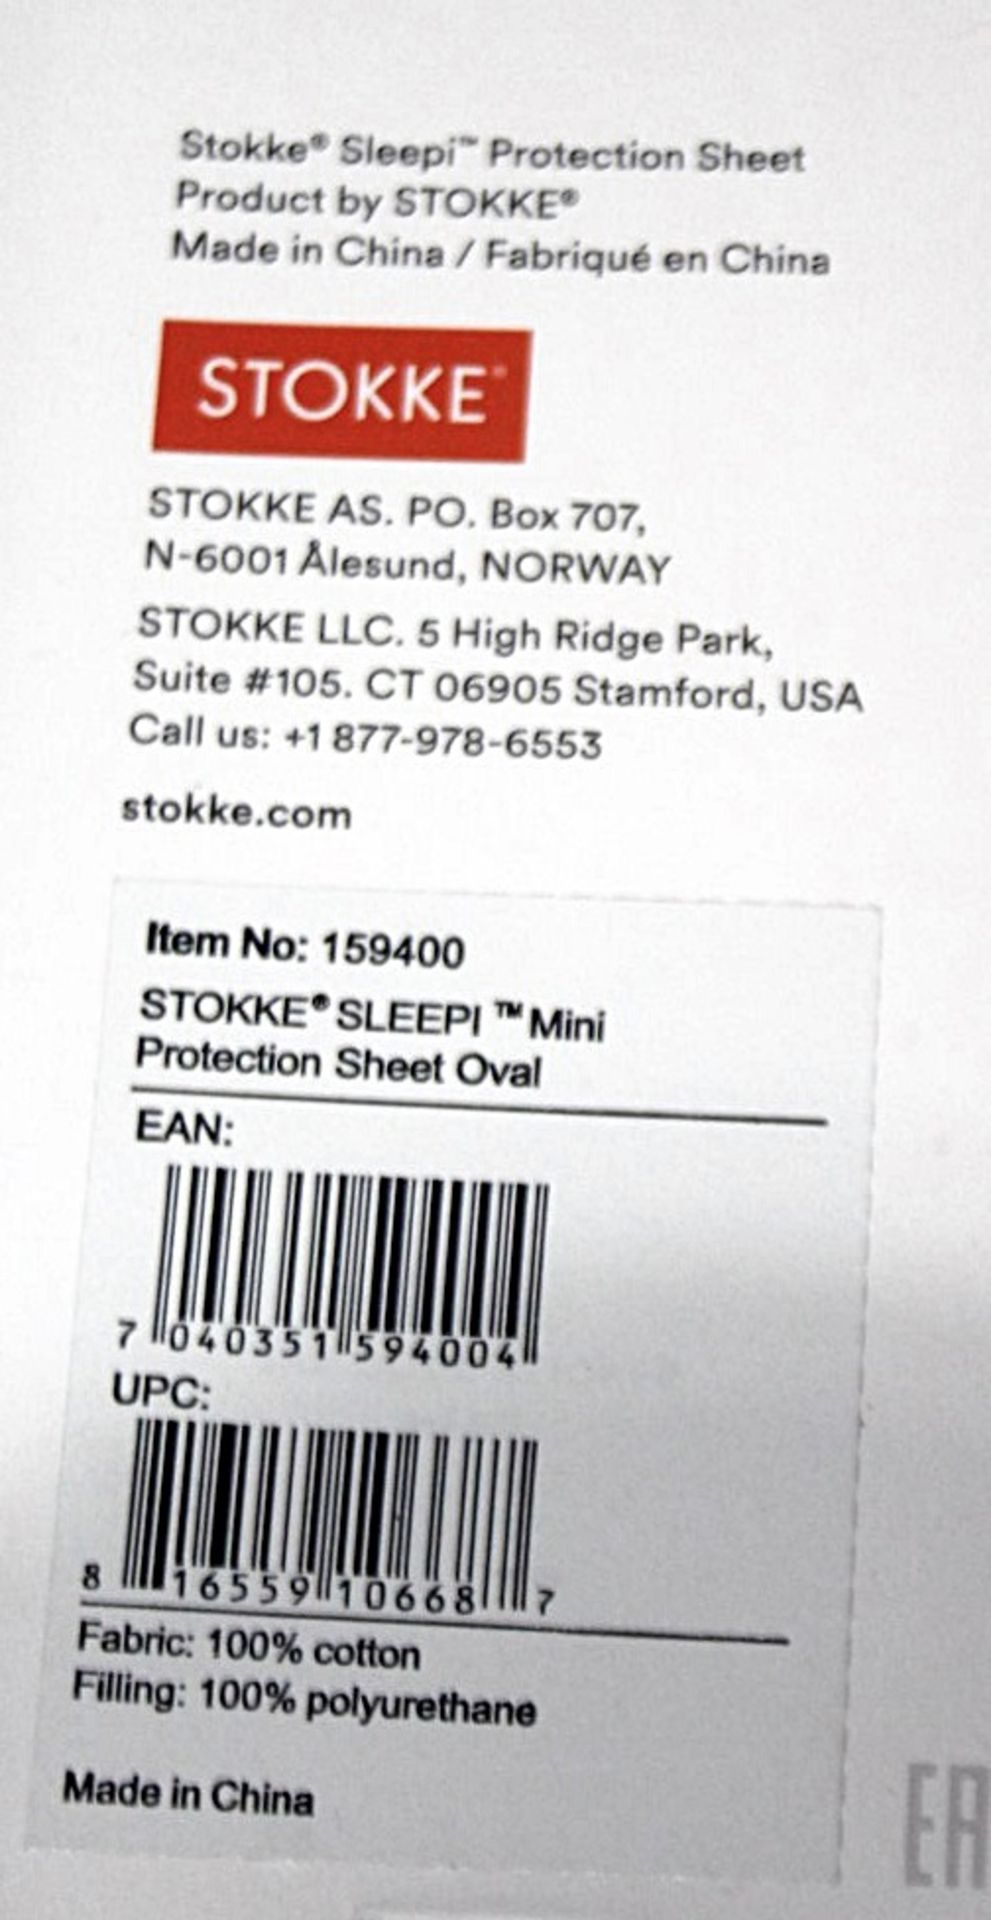 1 x STOKKE Sleepi™ Mini Protection Sheet Oval In White - Dimensions: 72 x 54cm - Unused Boxed - Image 3 of 5